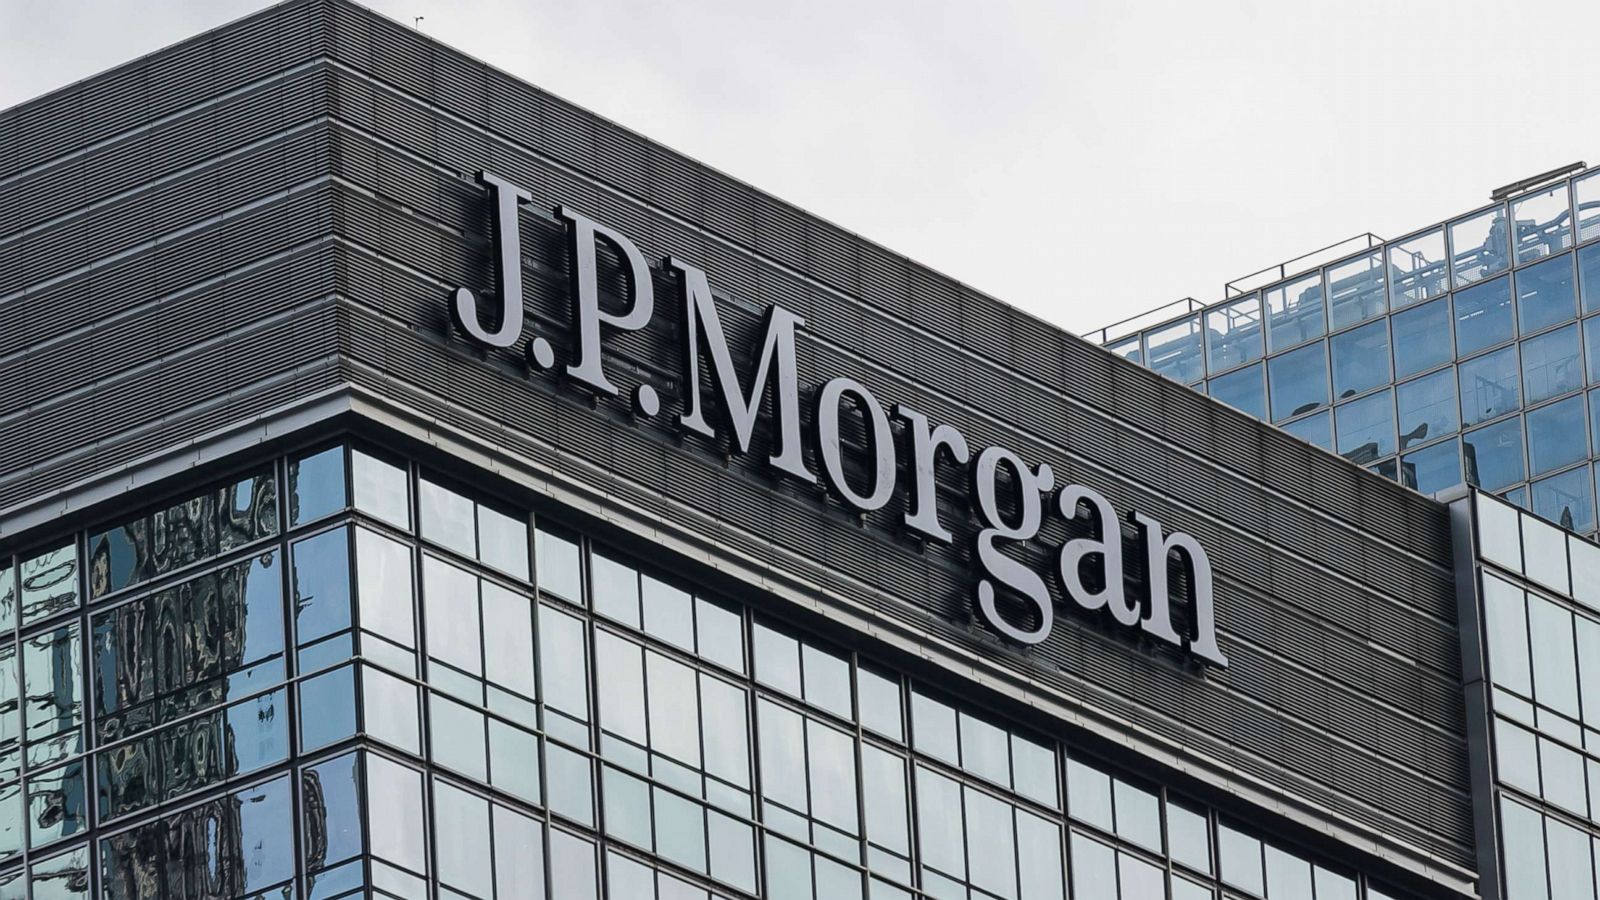 JPMorgan Chase investigating misuse of pandemic aid funds - ABC News